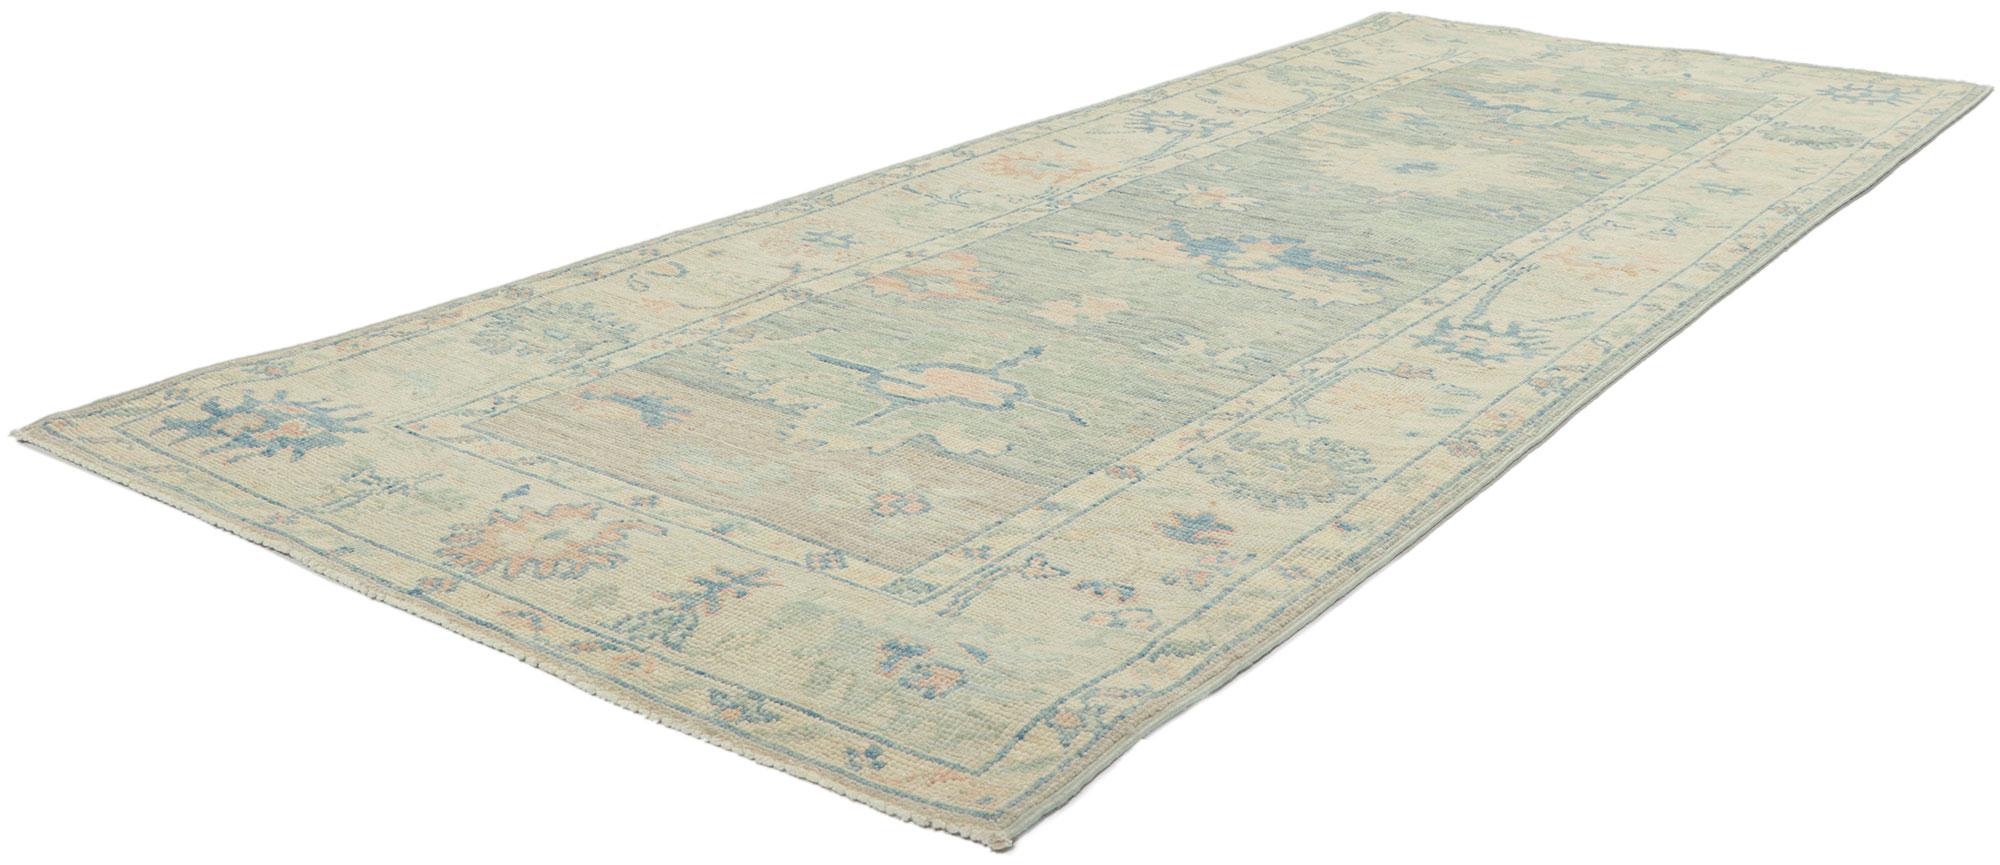 80854 New Modern Style Oushak runner with Soft Colors 03'01 x 07'11. Serene and sophisticated, this hand-knotted wool contemporary Contemporary Oushak runner beautifully embodies a modern style. The composition features an all-over botanical pattern